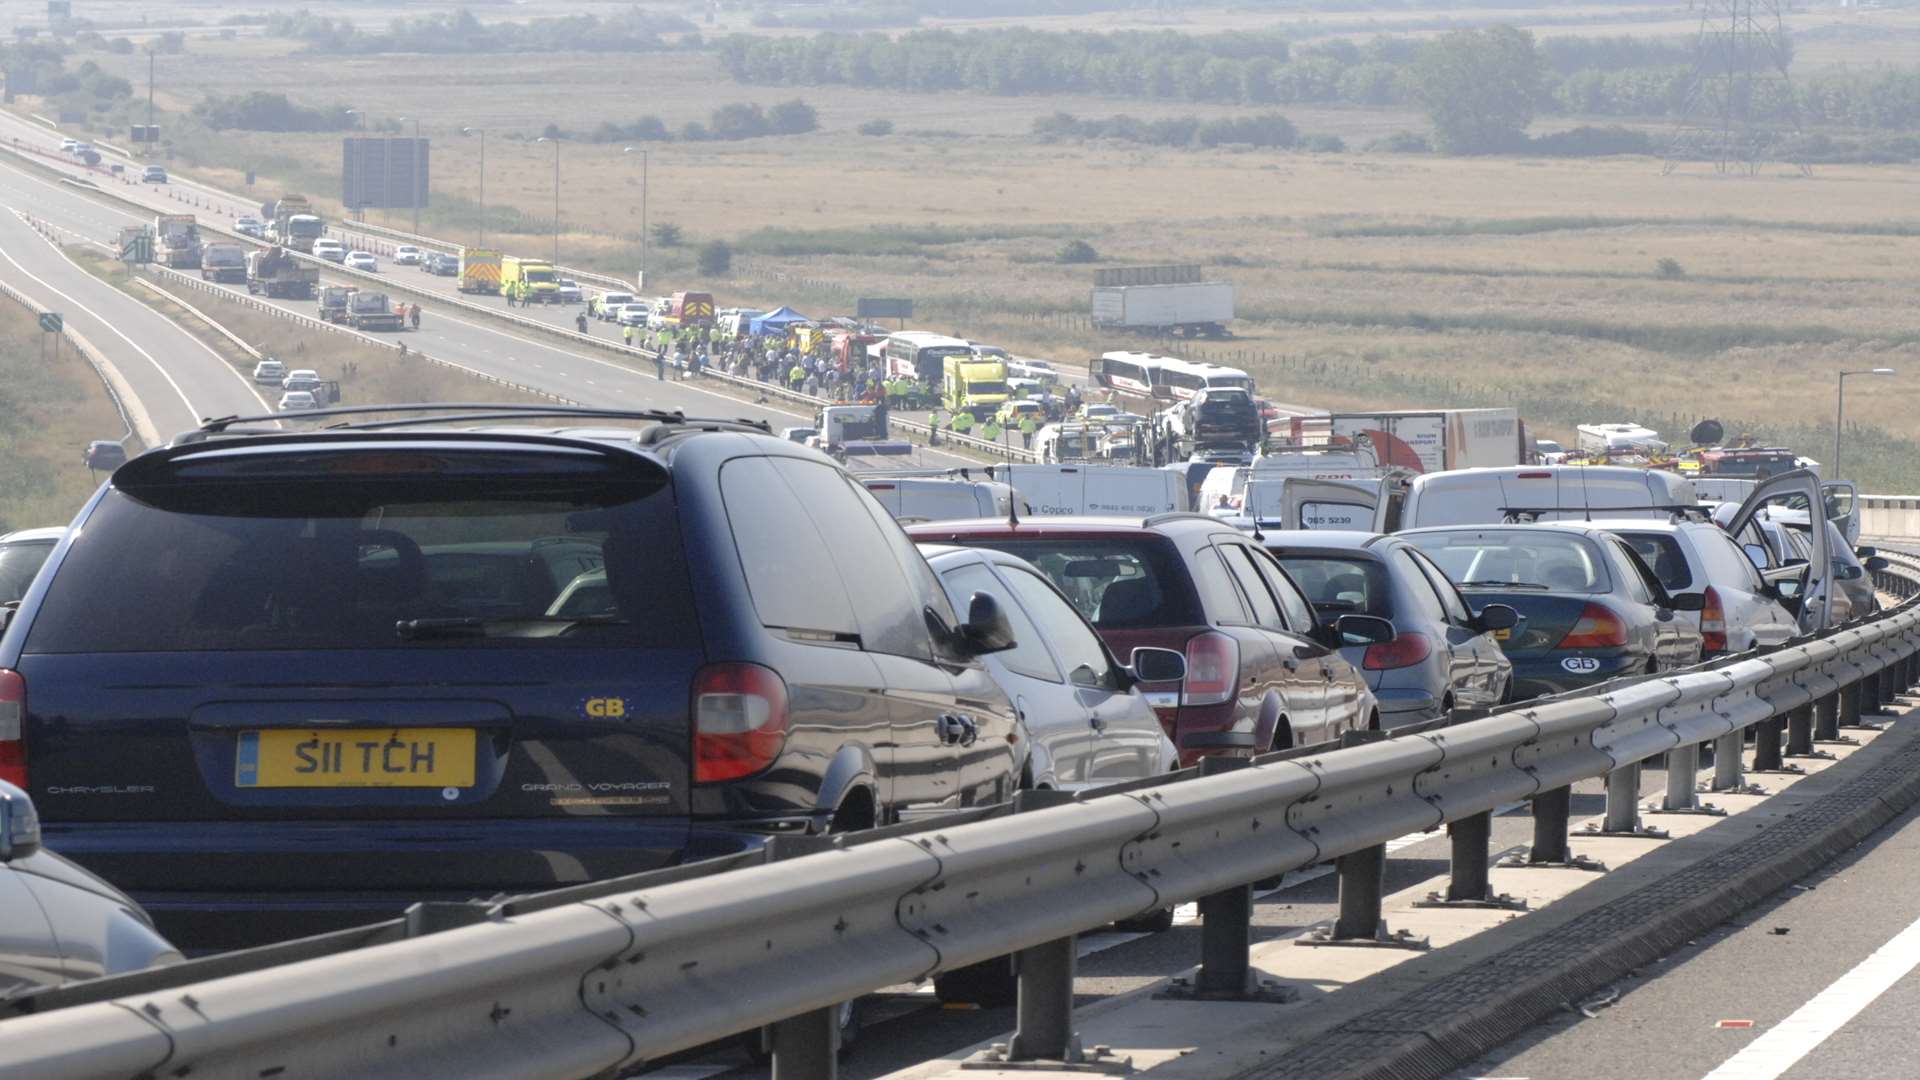 Trail of wrecked cars on the Sheppey Crossing